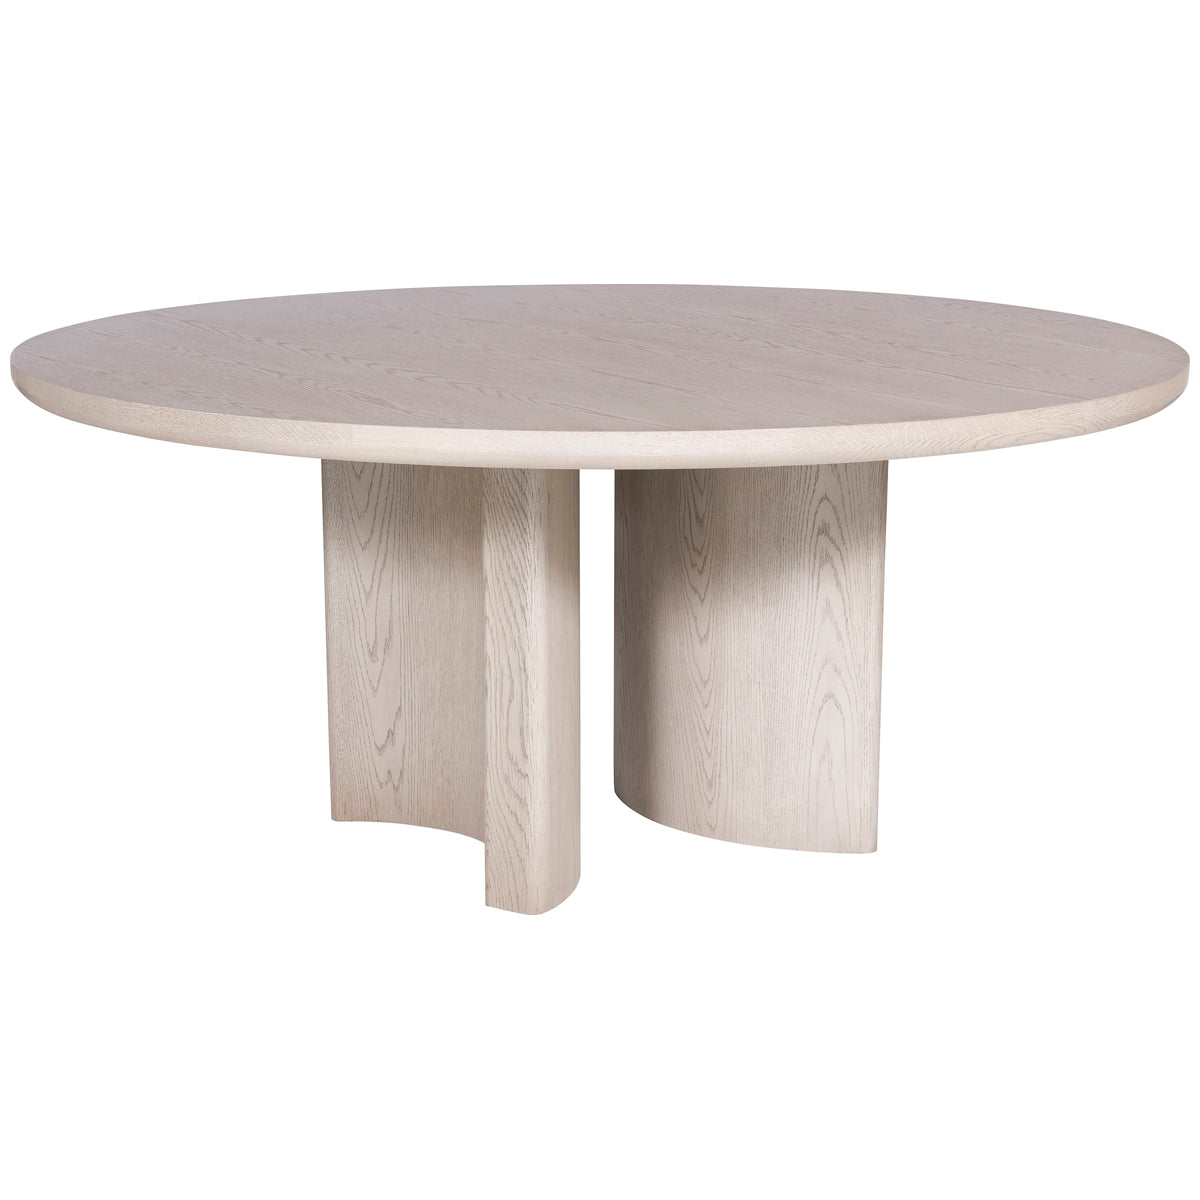 Vanguard Furniture Form Round Dining Table